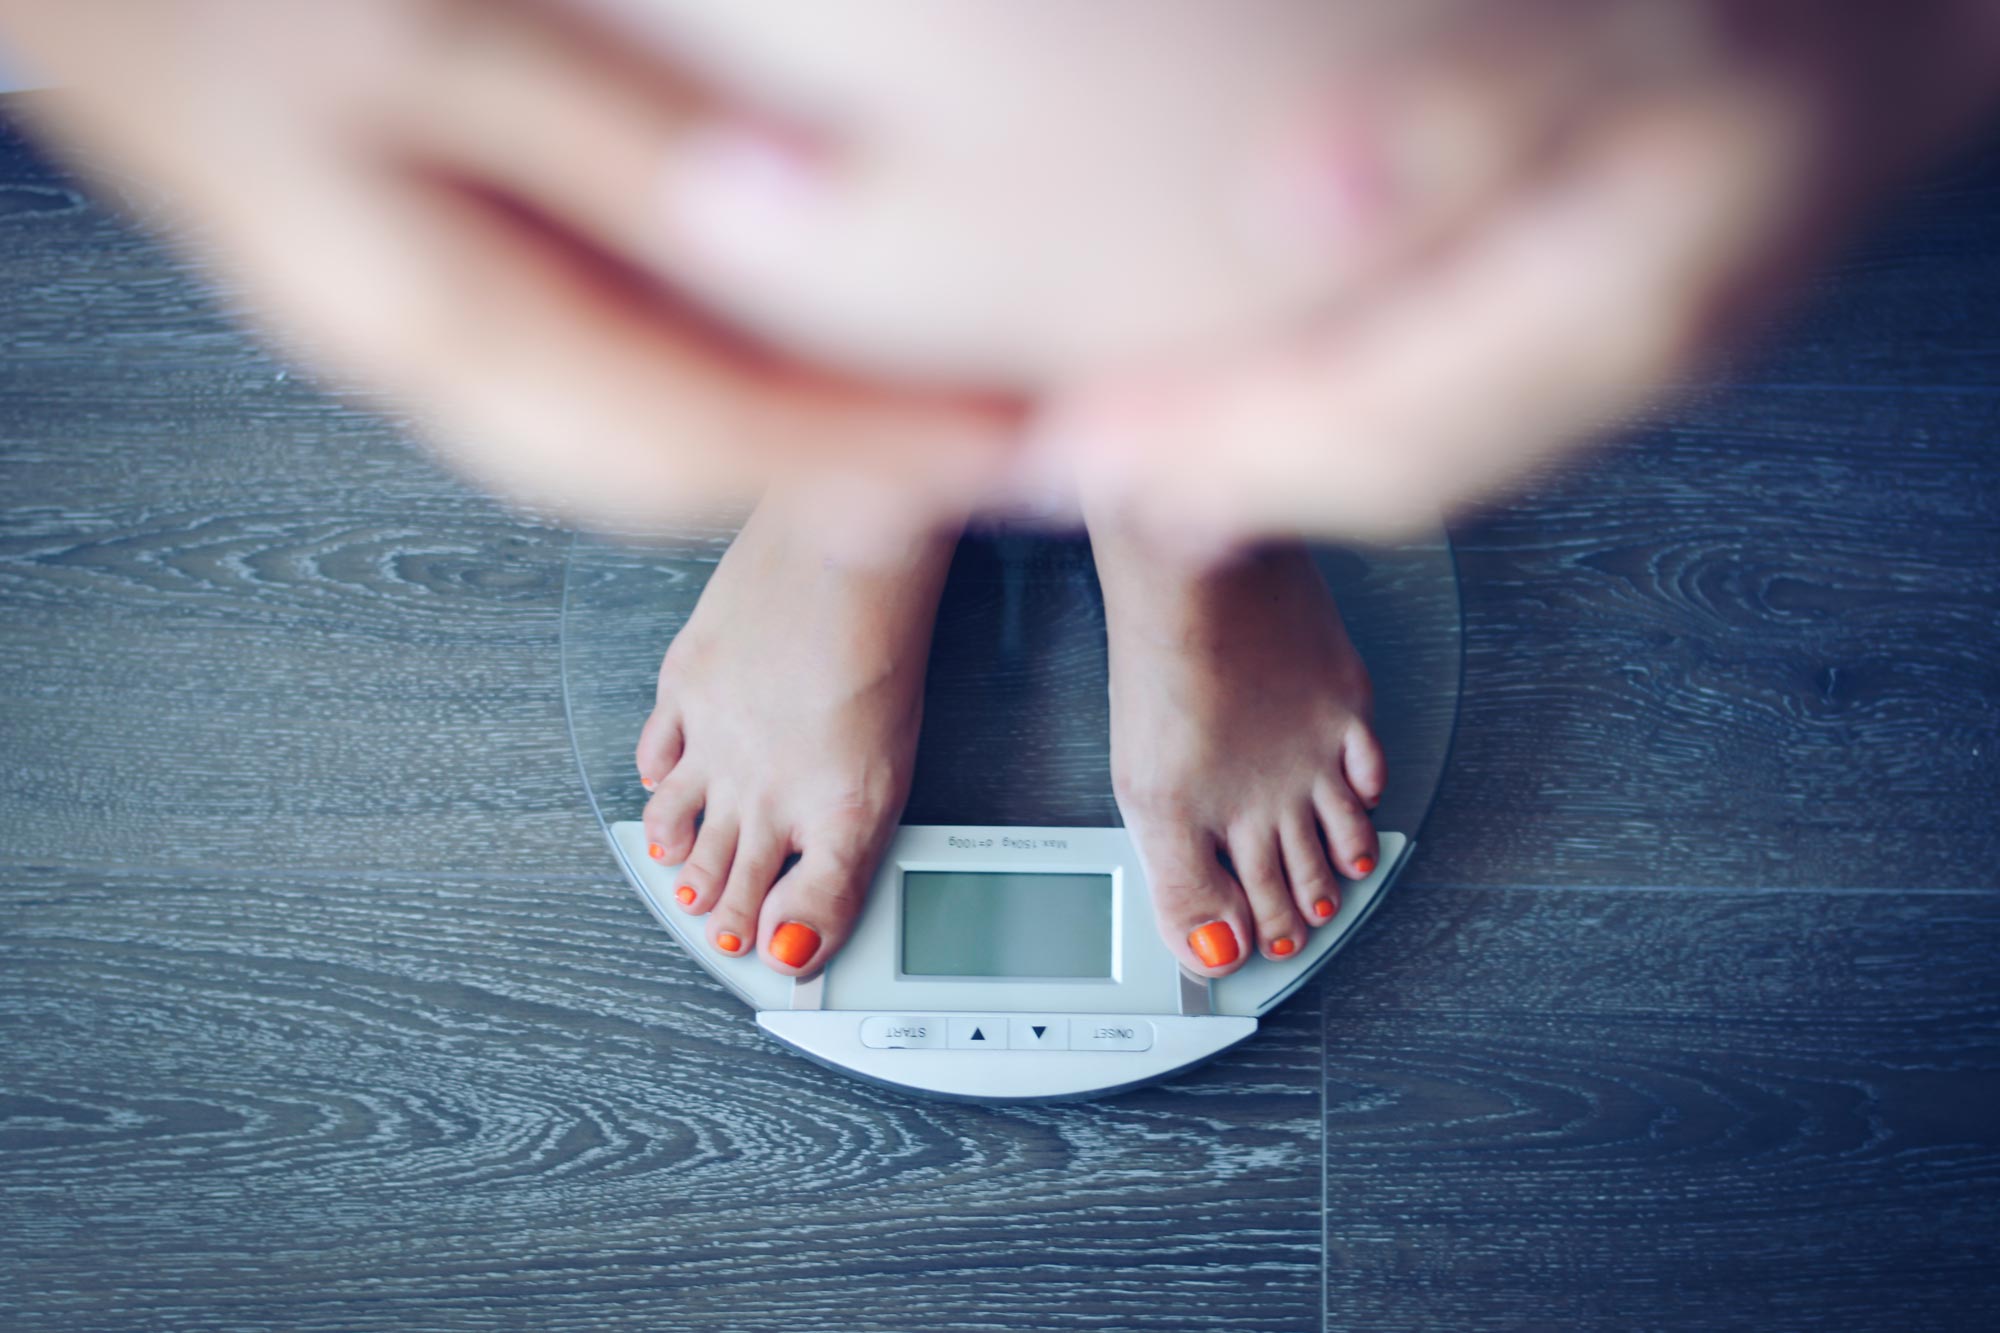 A pregnant woman weighs herself on a digital scale.